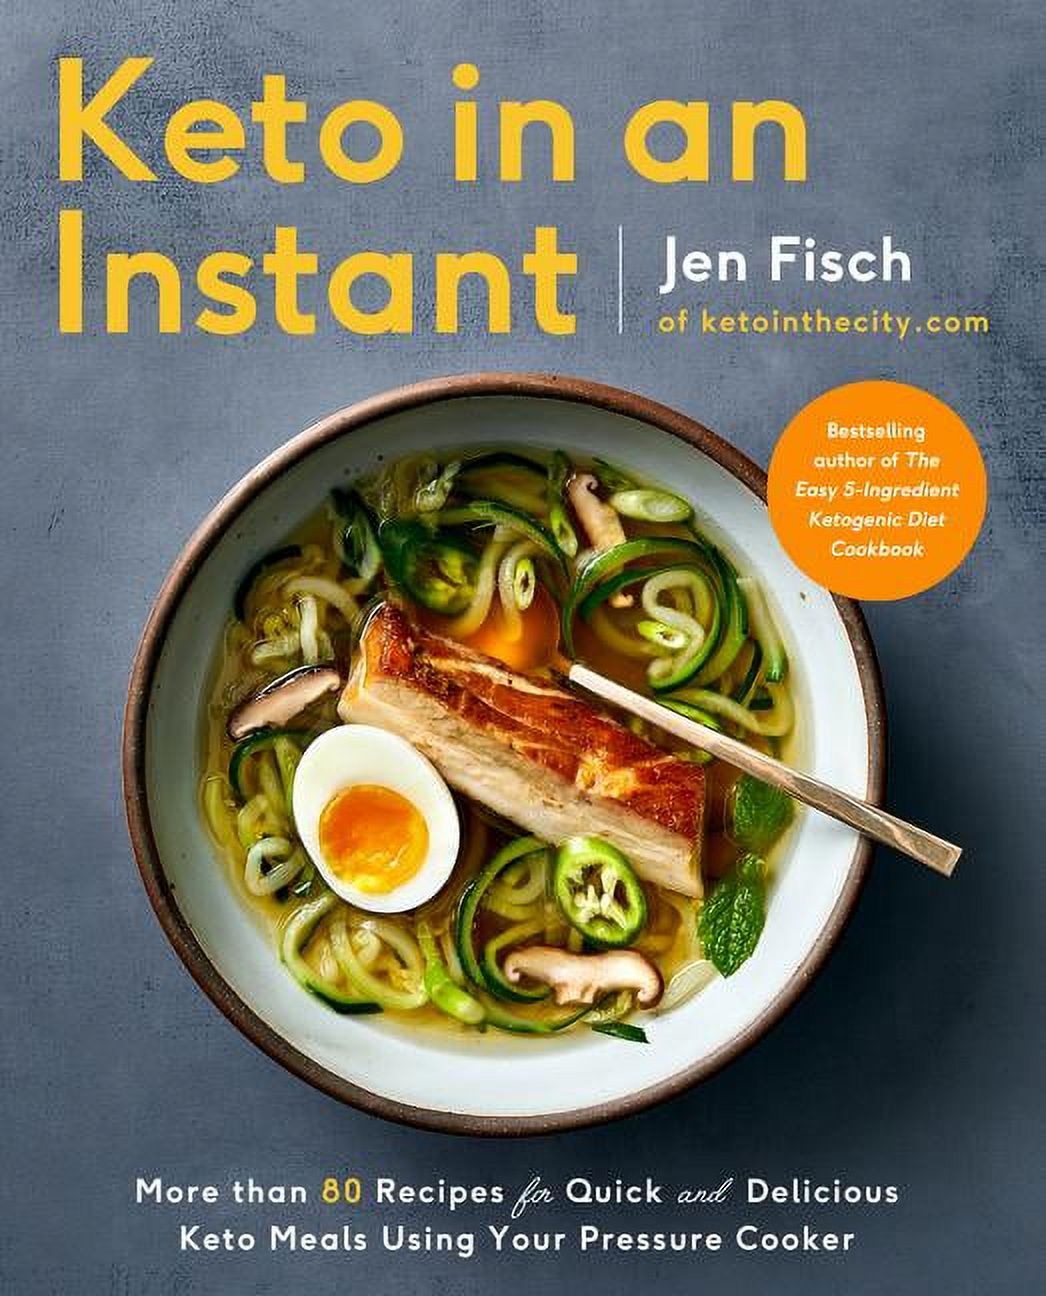 Keto in an Instant: More Than 80 Recipes for Quick & Delicious Keto Meals Using Your Pressure Cooker (Paperback) - image 1 of 1